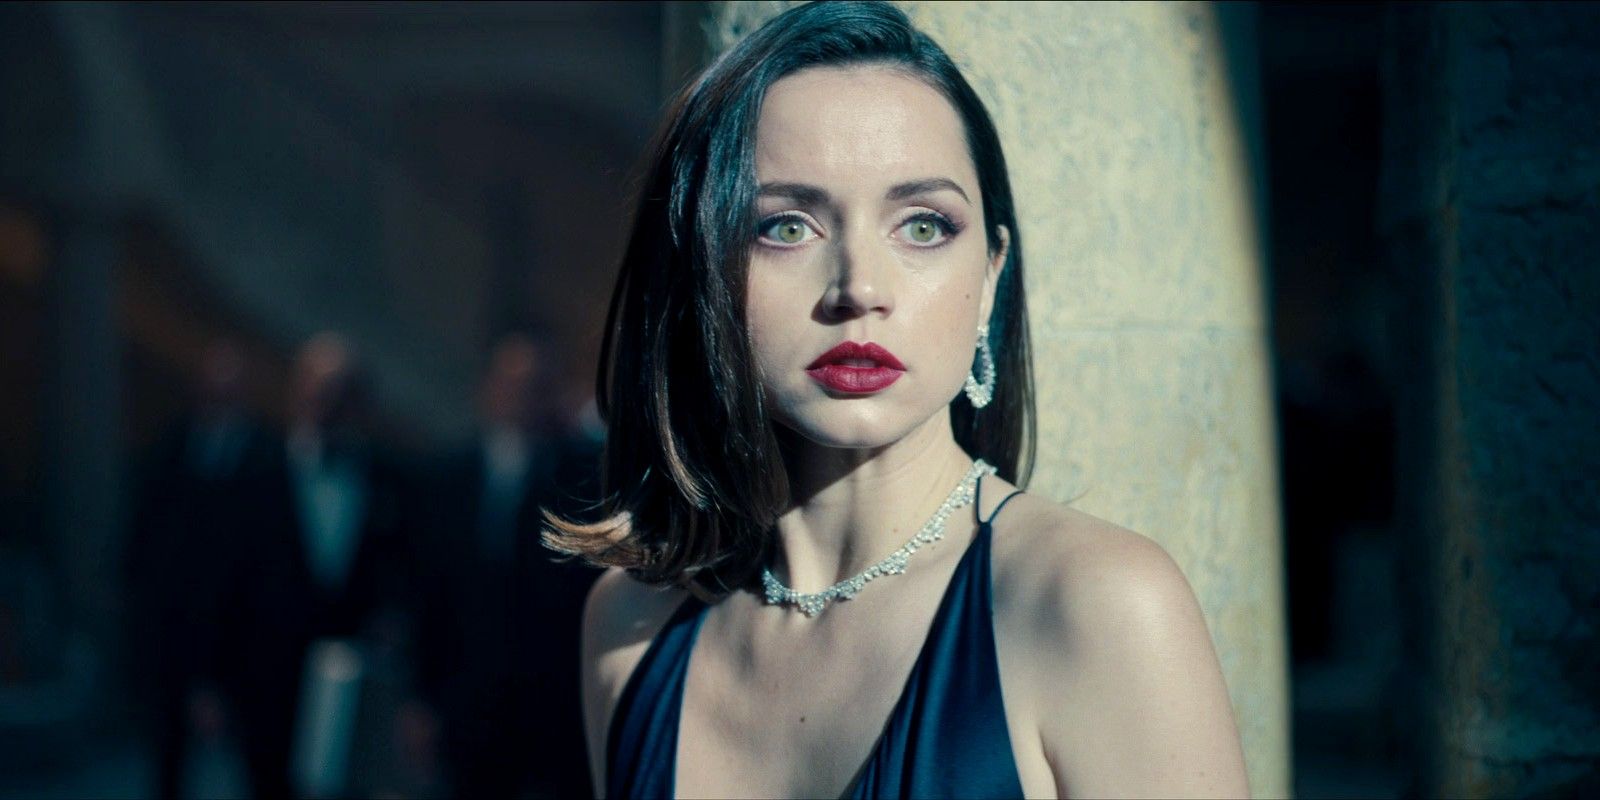 Ana de Armas as Paloma at Blofeld's birthday party in No Time to Die